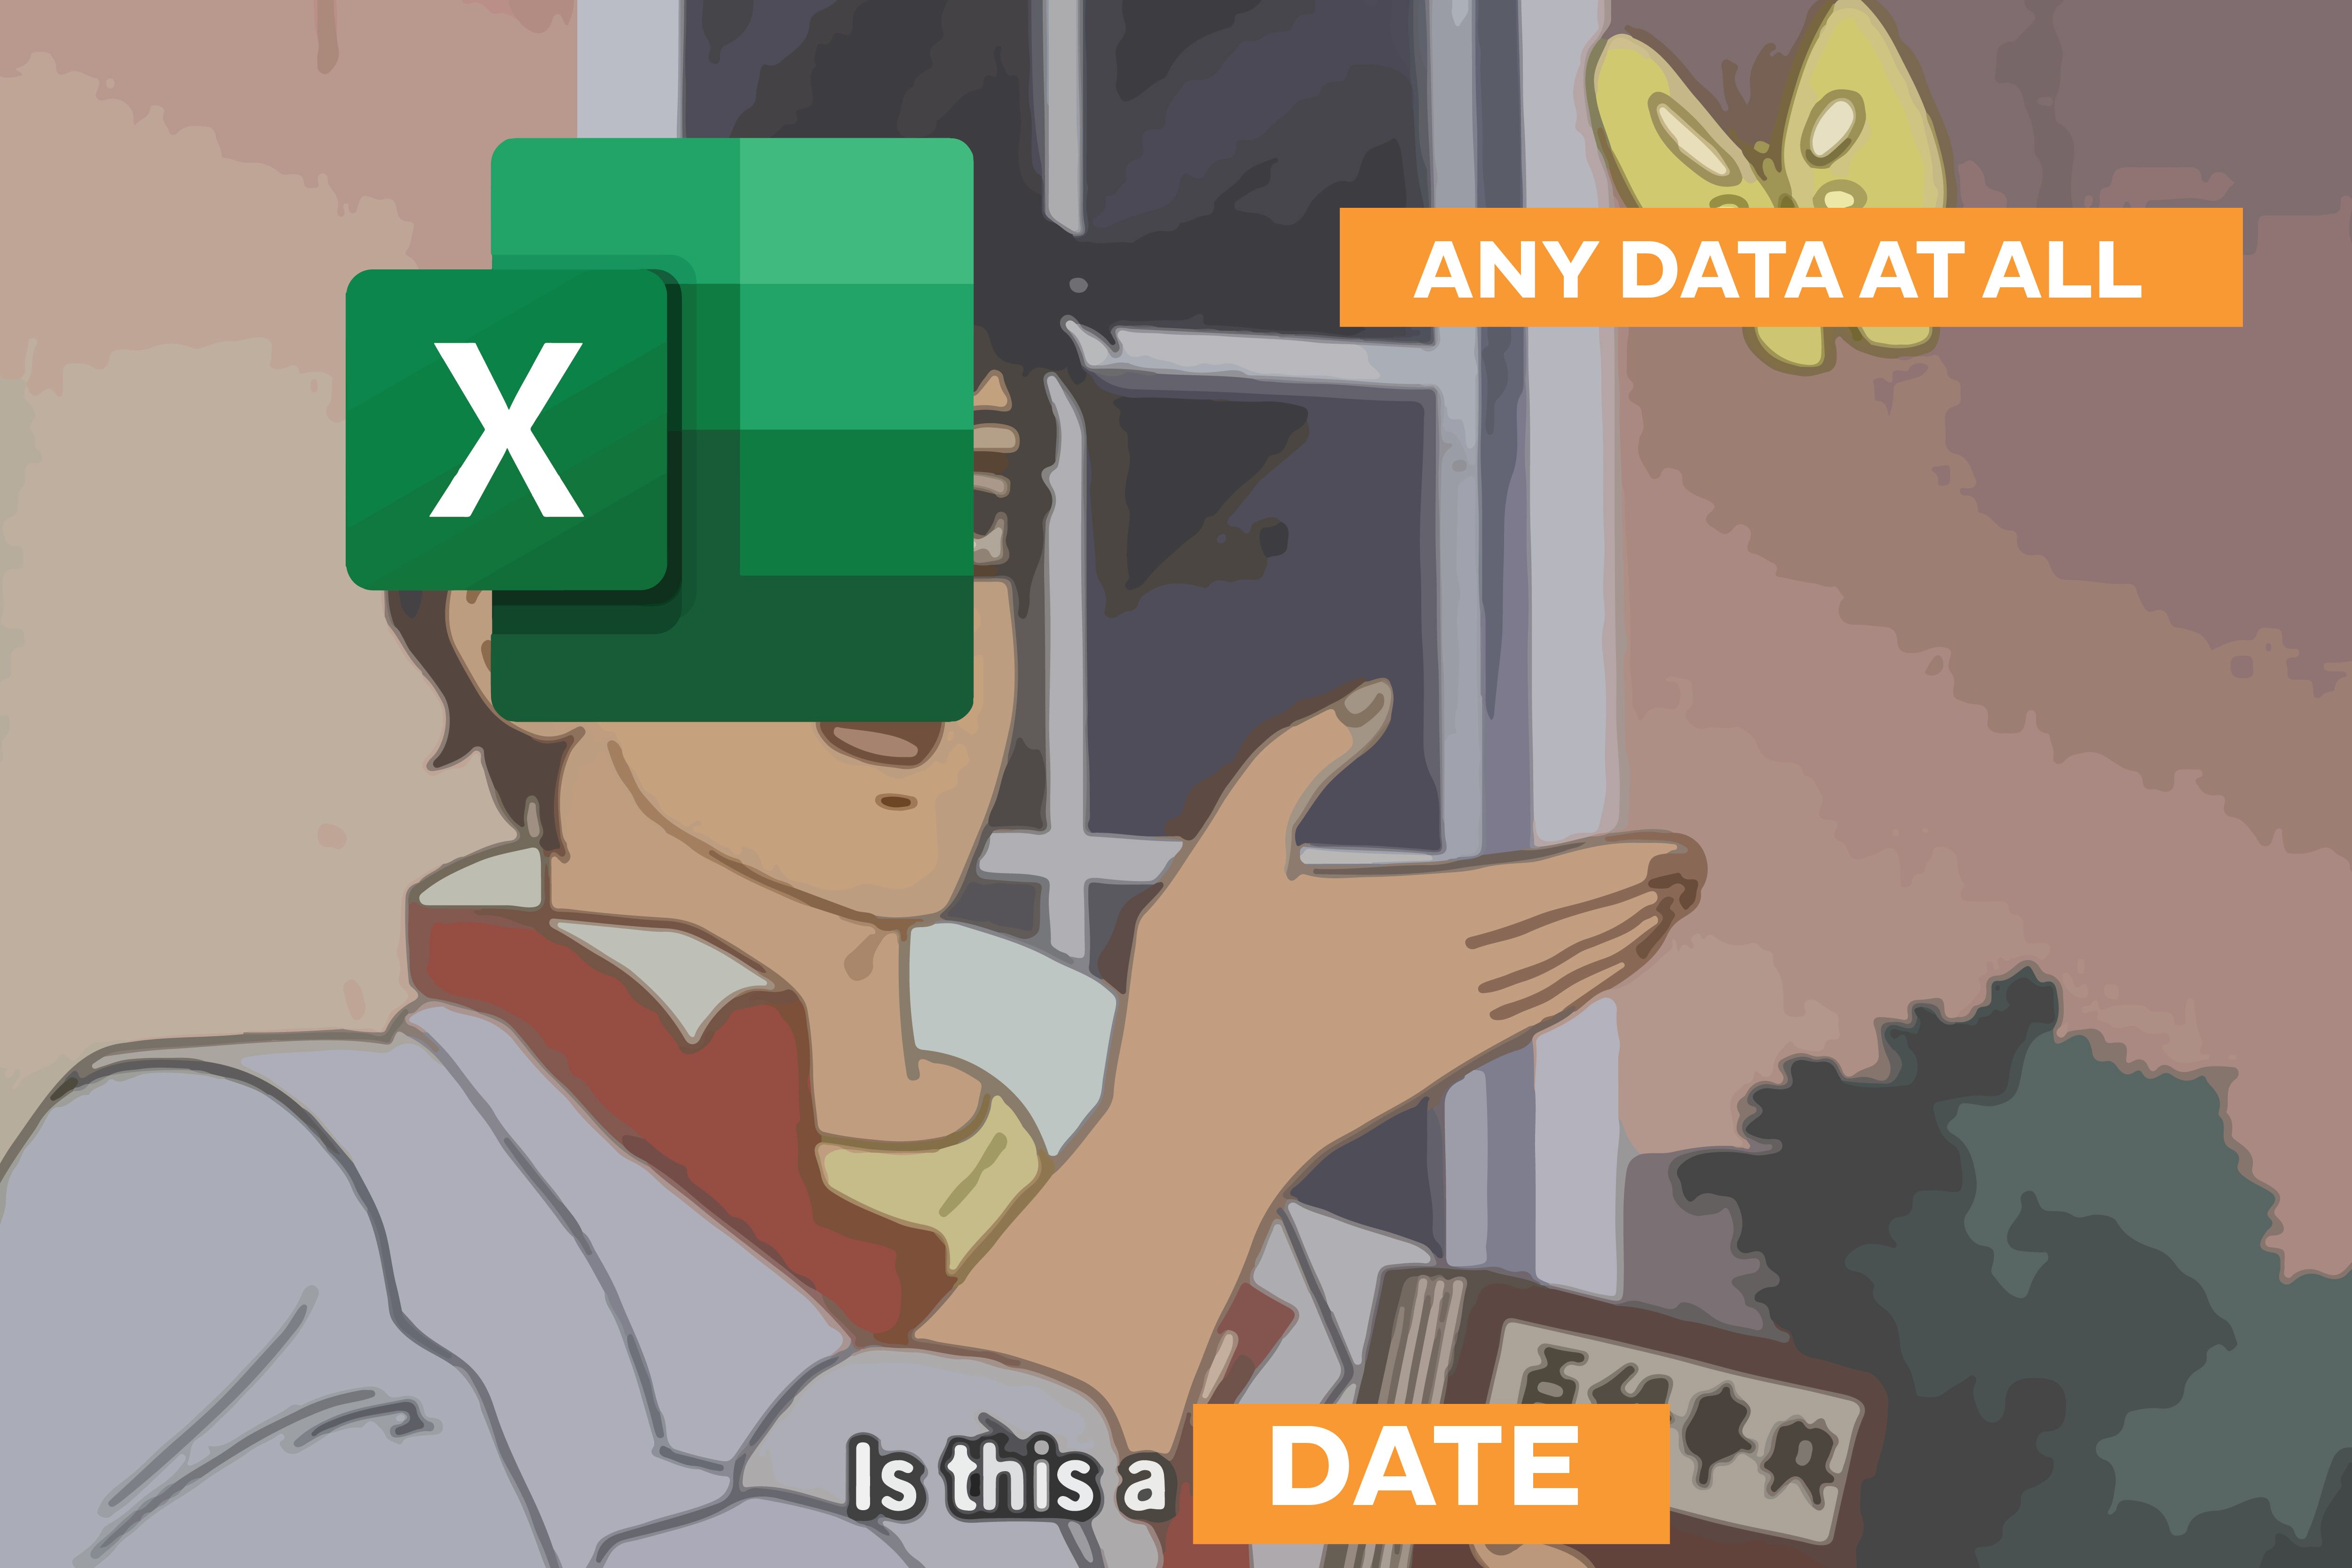 Microsoft excel as a data analysis tool for data scientist